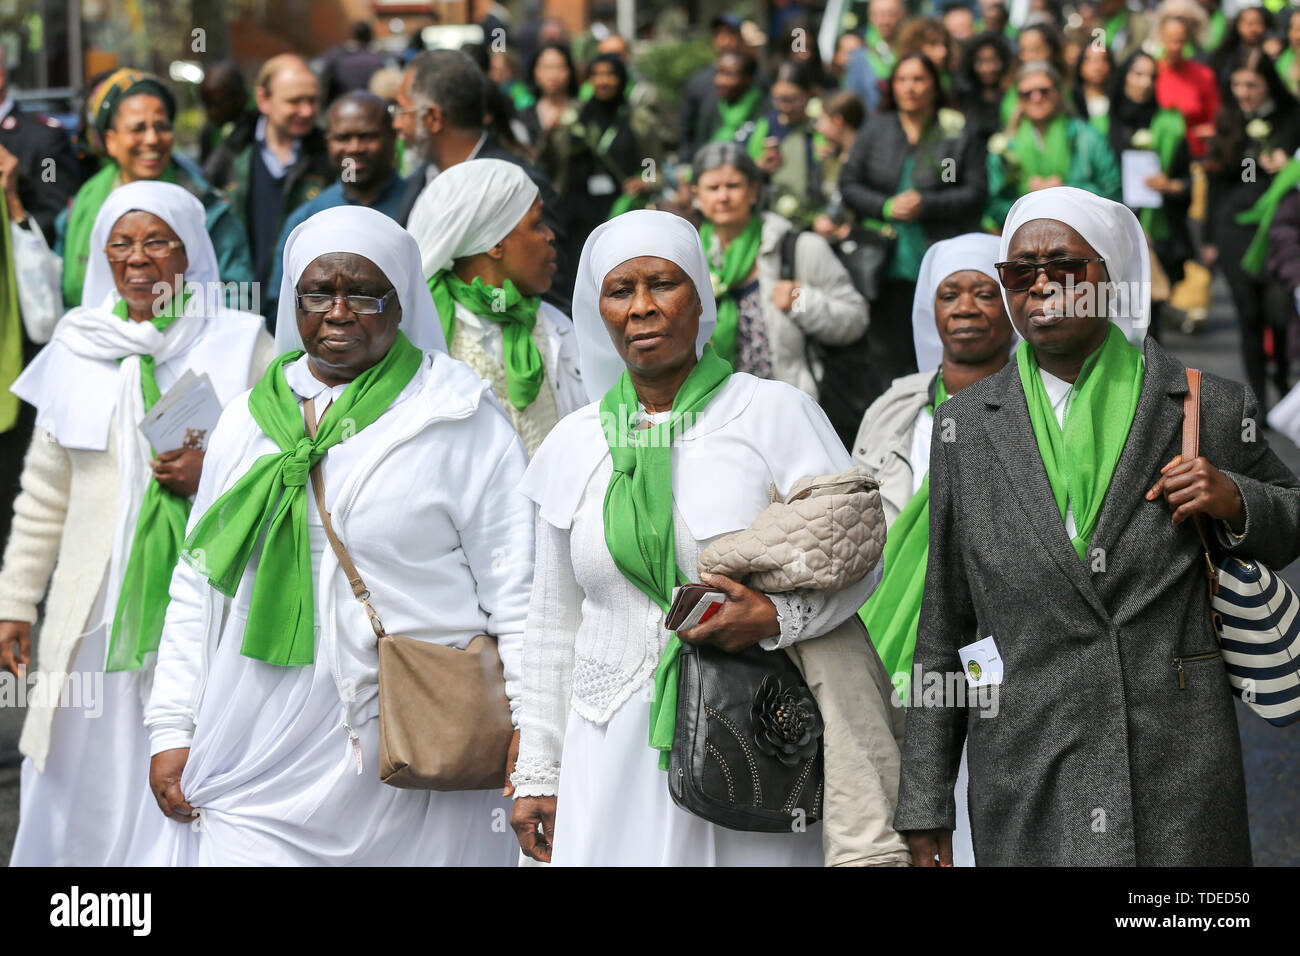 London, UK. 14th June, 2019. Nuns wearing symbolic green scarf take part in a silent marching from St Helen's Church to Grenfell Tower during the commemoration. The Grenfell Tower second anniversary commemoration of the tower block fire. On 14 June 2017, just before 1:00am a fire broke out in the kitchen of the fourth floor flat at the 24-storey residential tower block in North Kensington, West London, which took the lives of 72 people. More than 70 others were injured and 223 people escaped. Credit: SOPA Images Limited/Alamy Live News Stock Photo